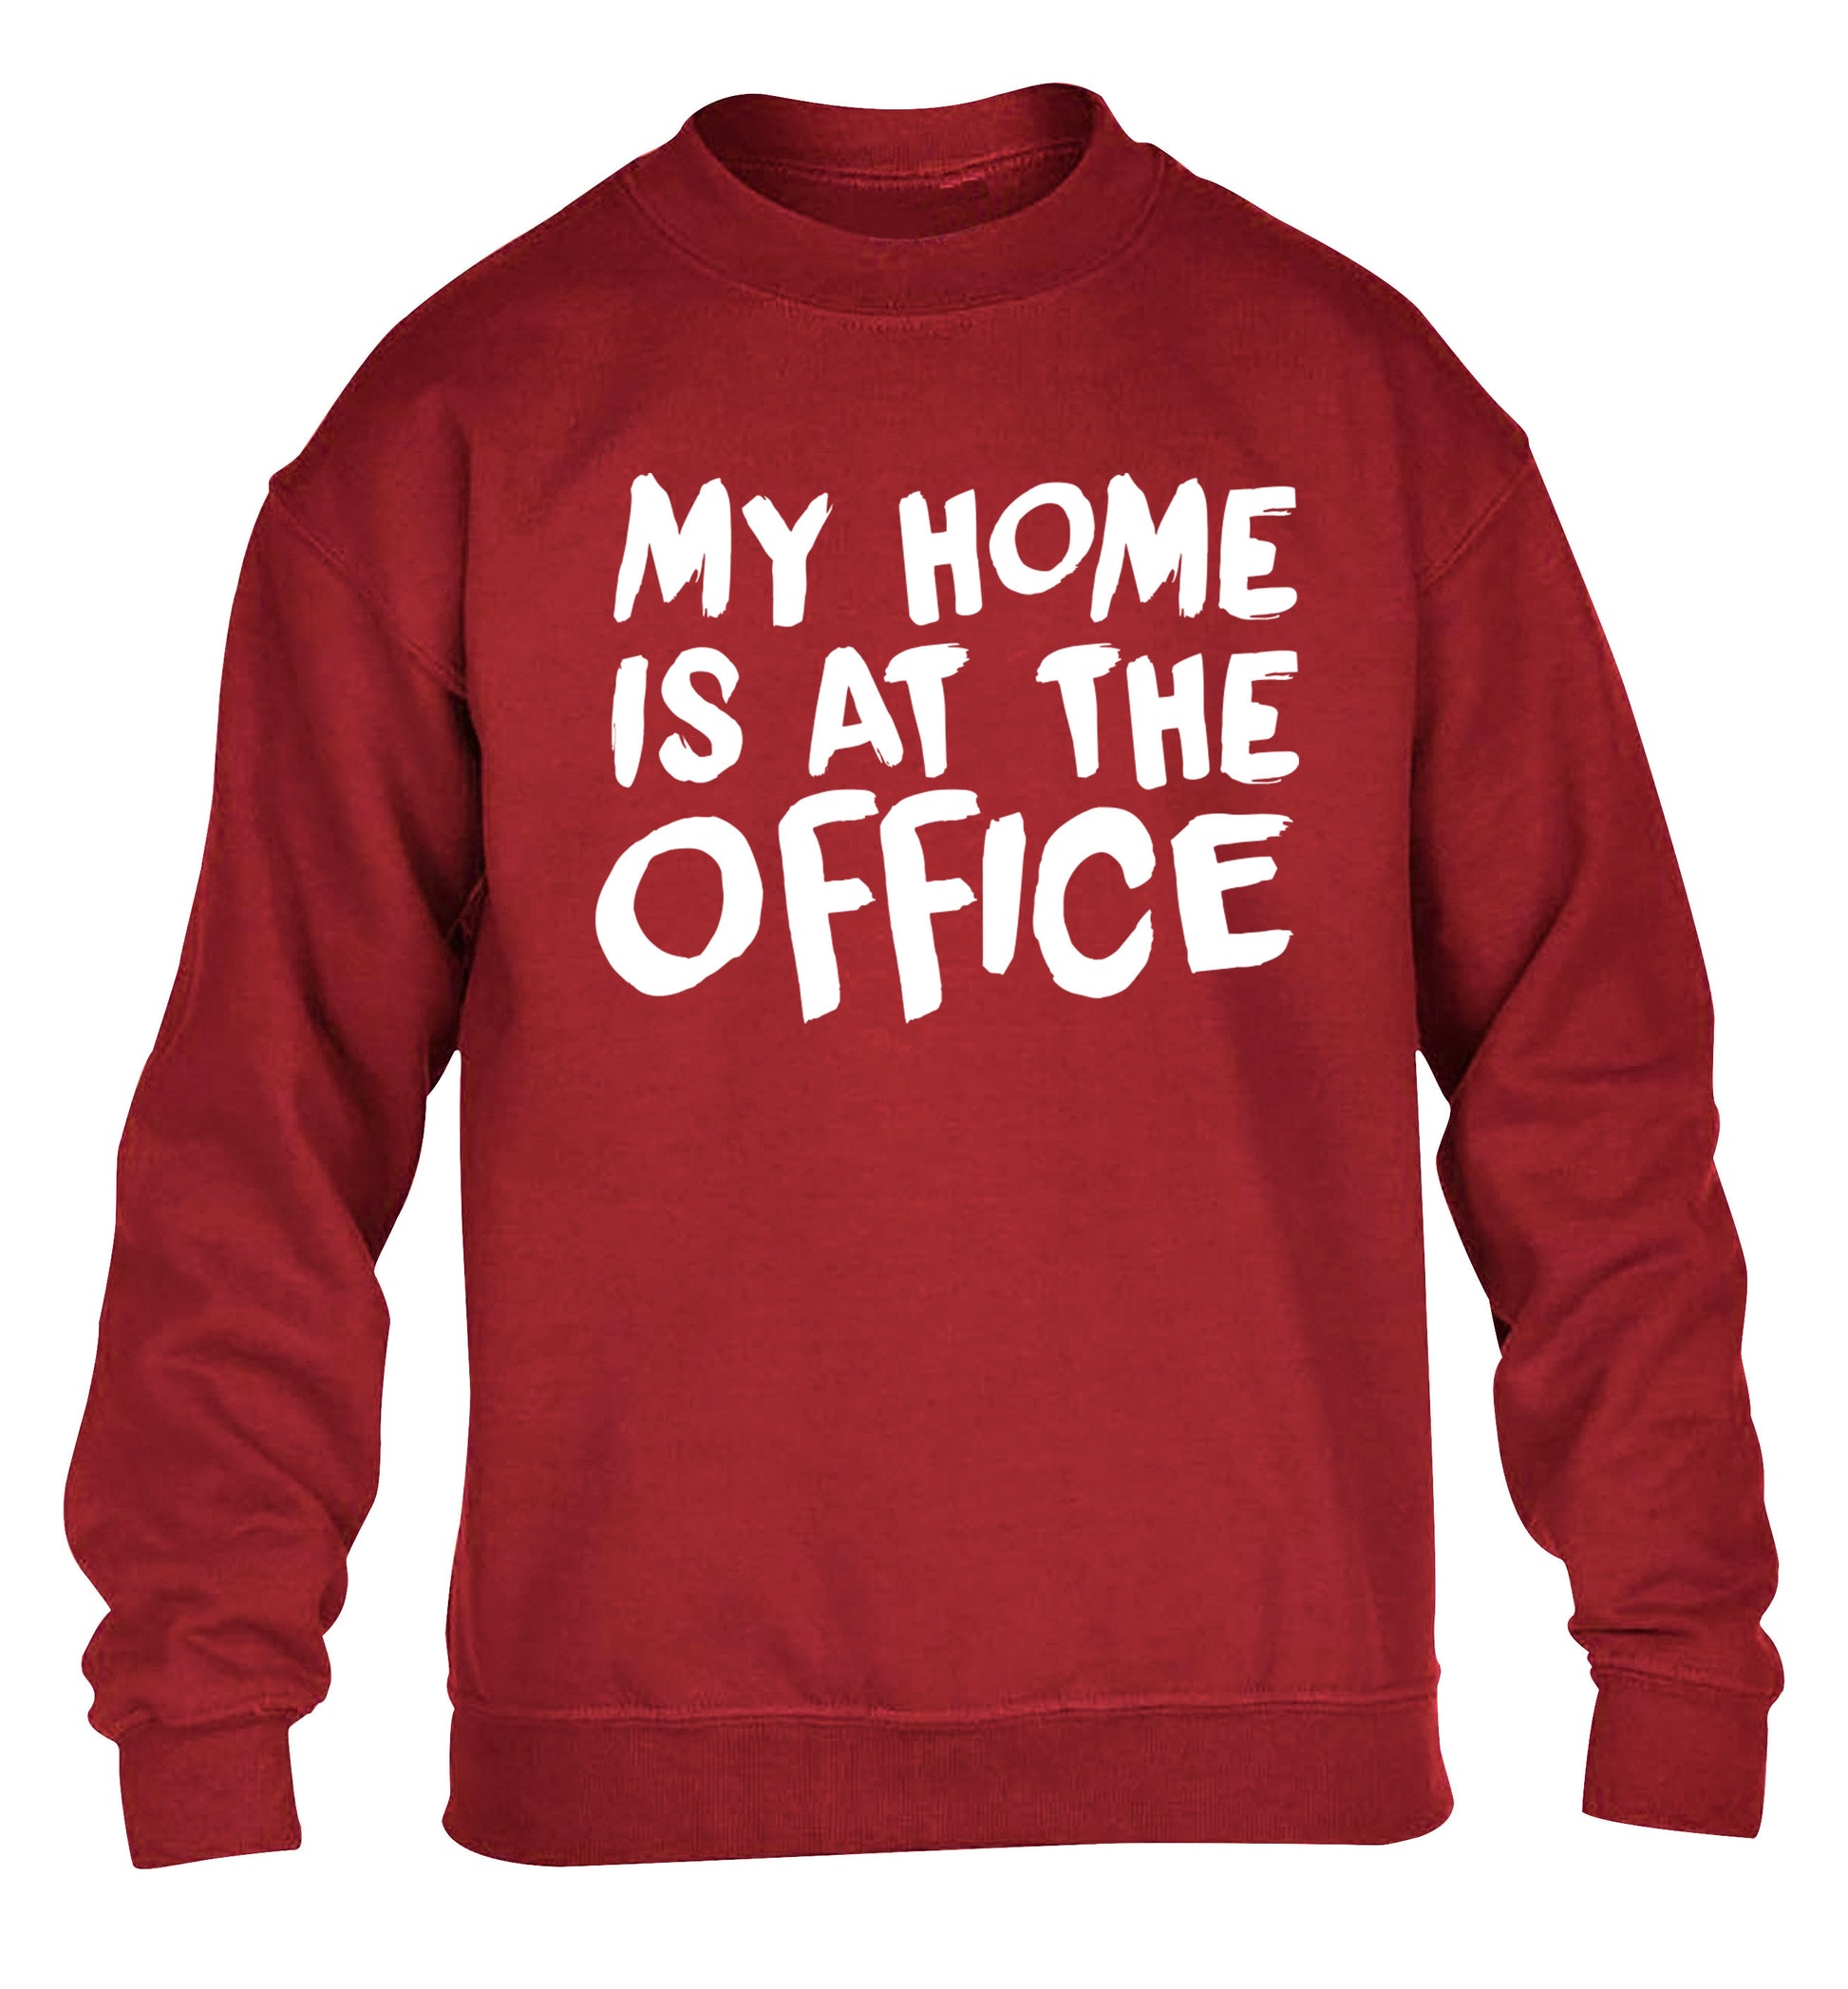 My home is at the office children's grey sweater 12-14 Years